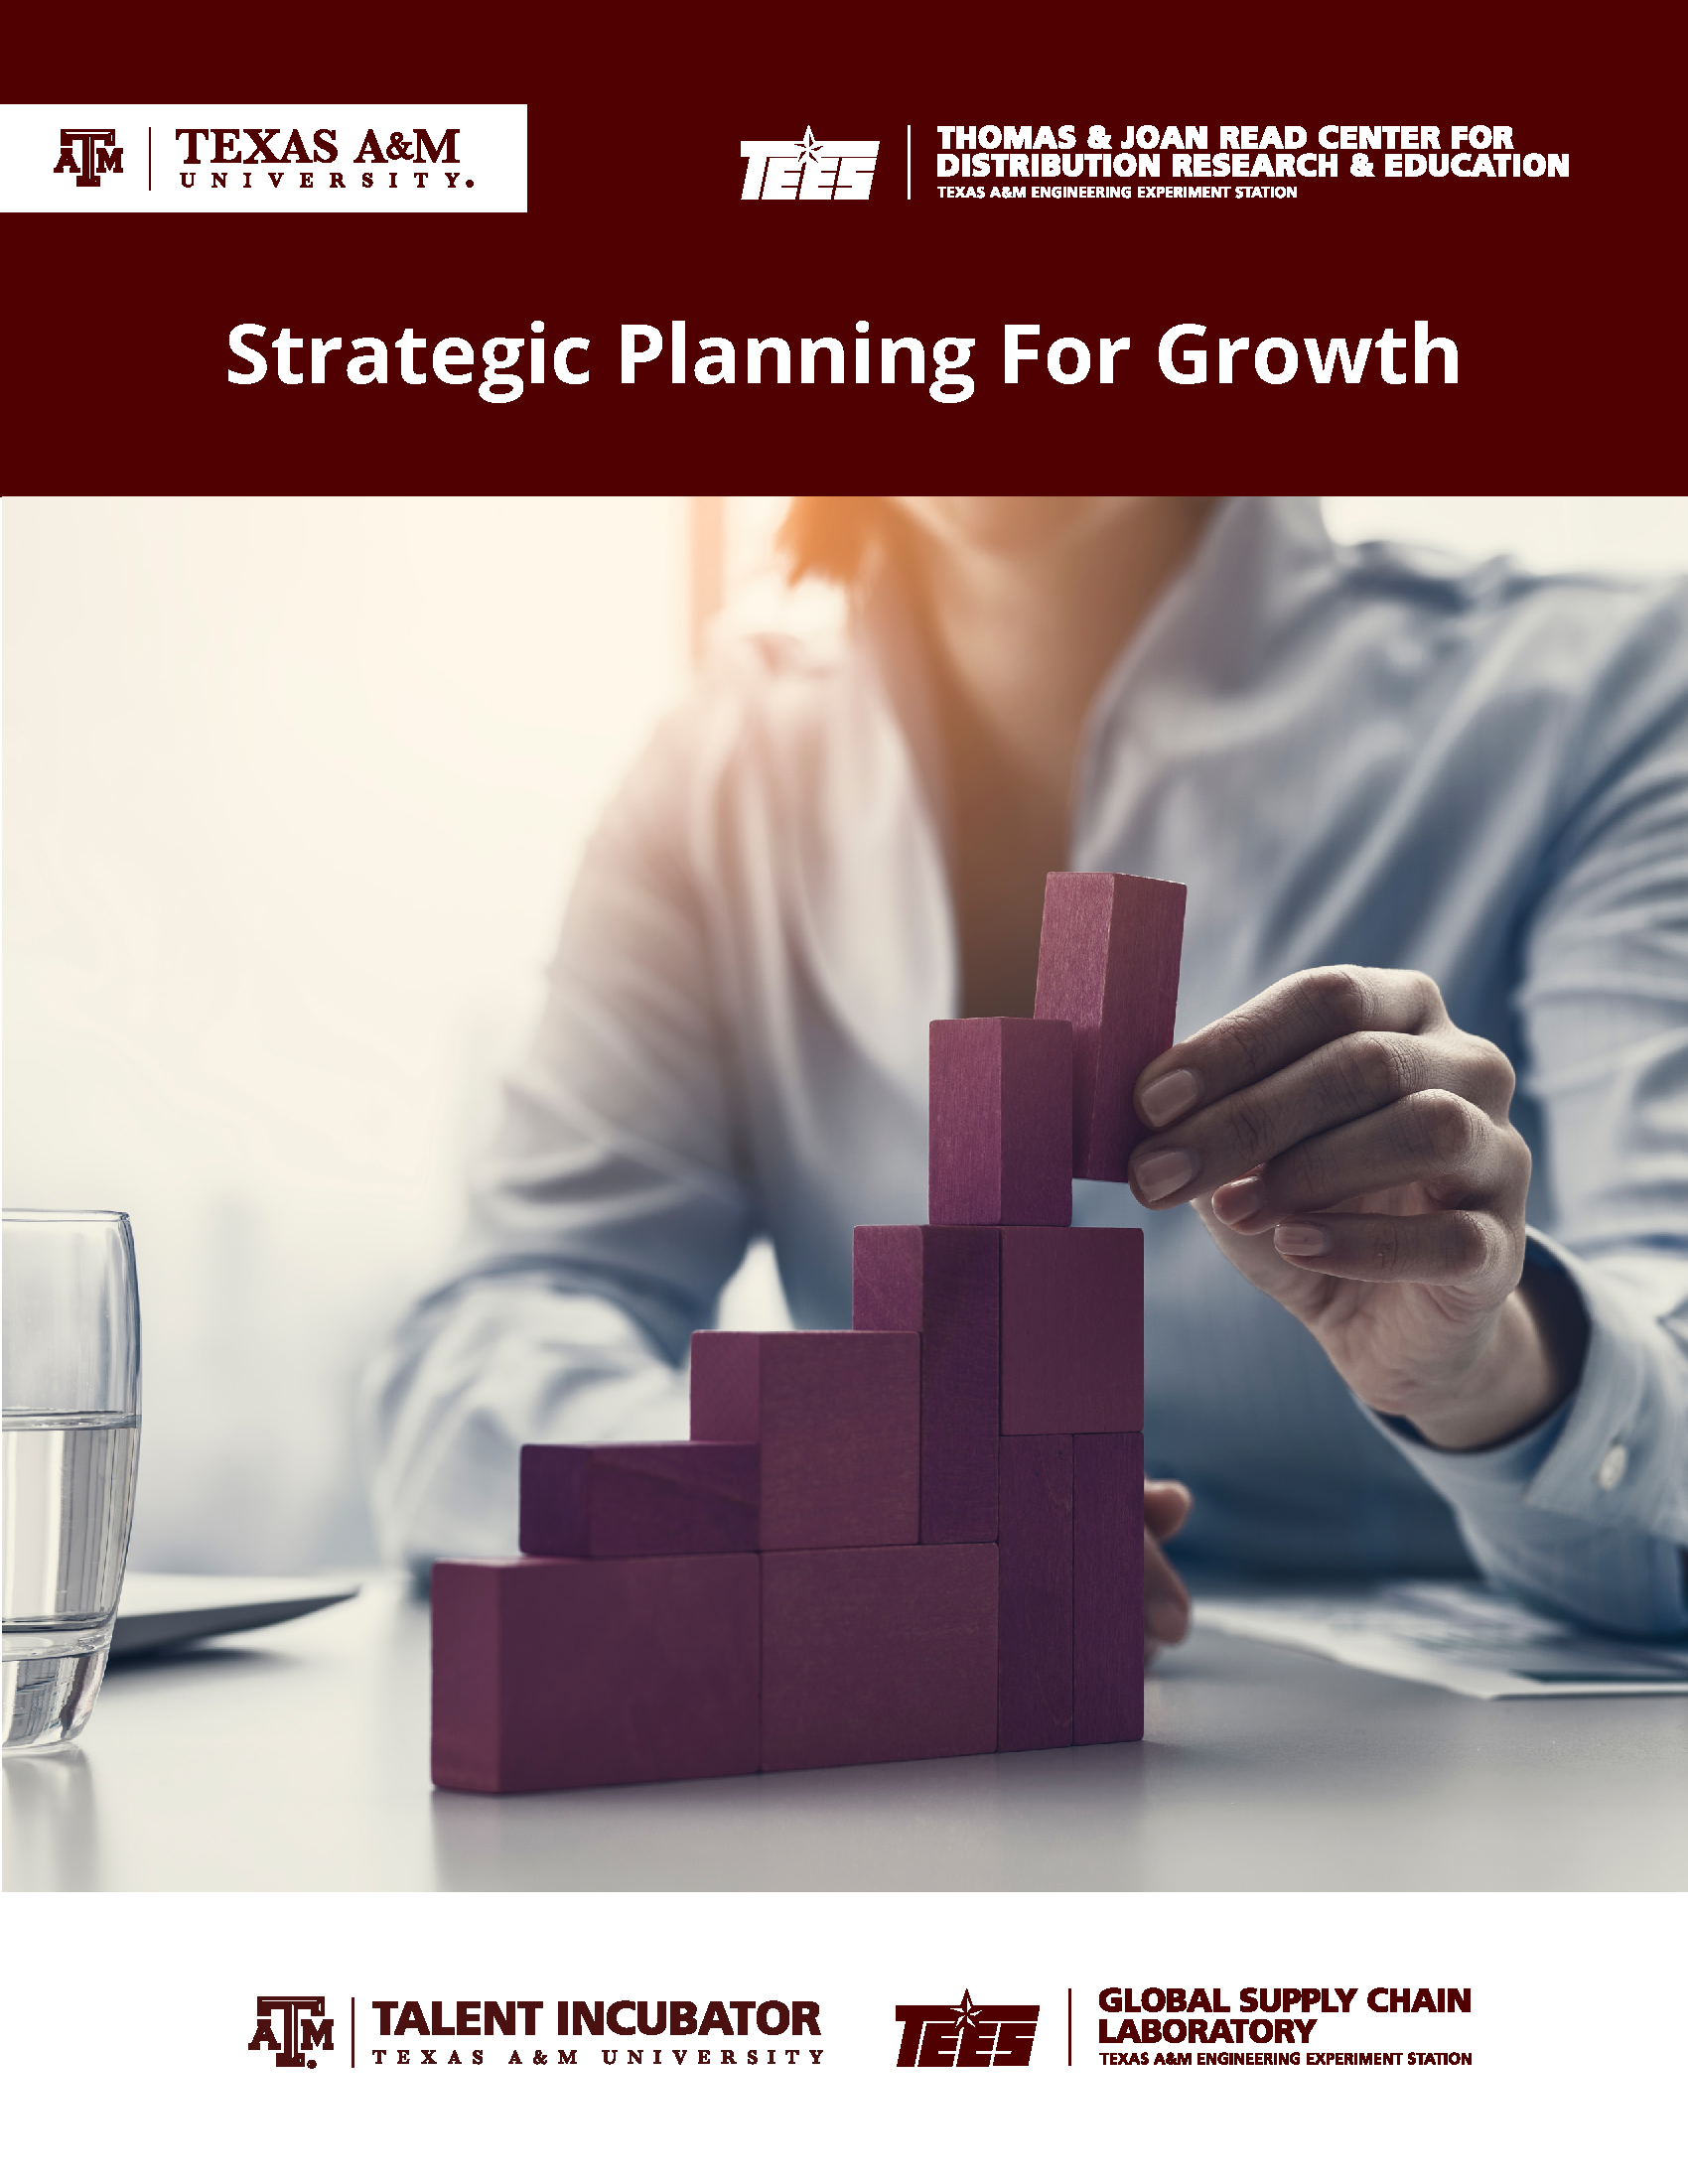 Strategic Planning for Growth